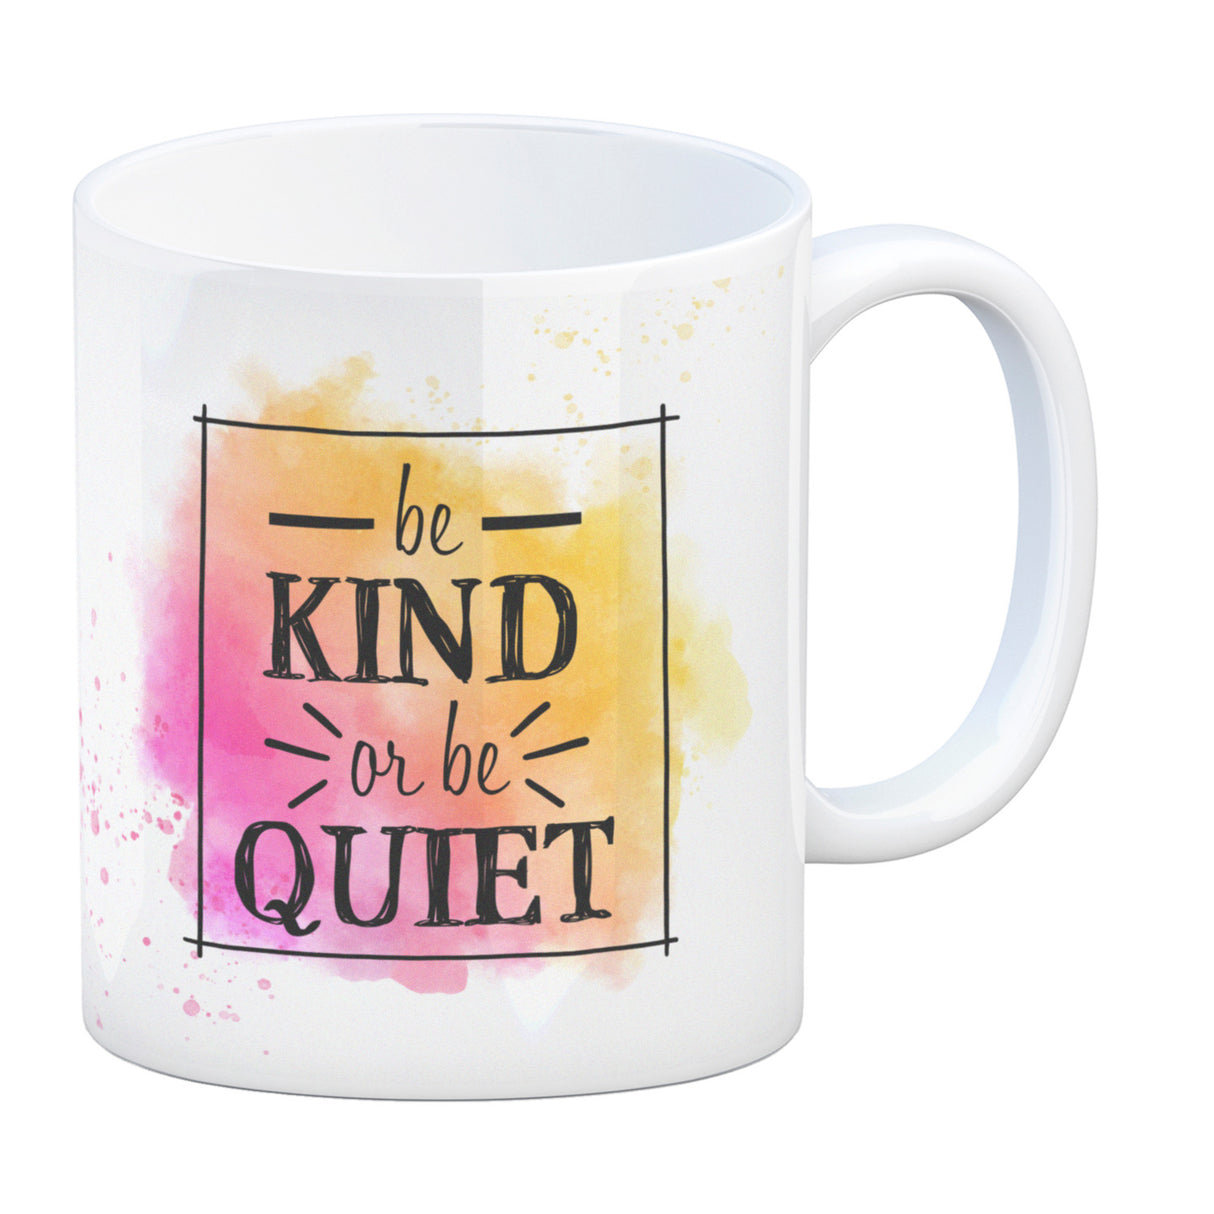 Be kind or be quiet Kaffeebecher